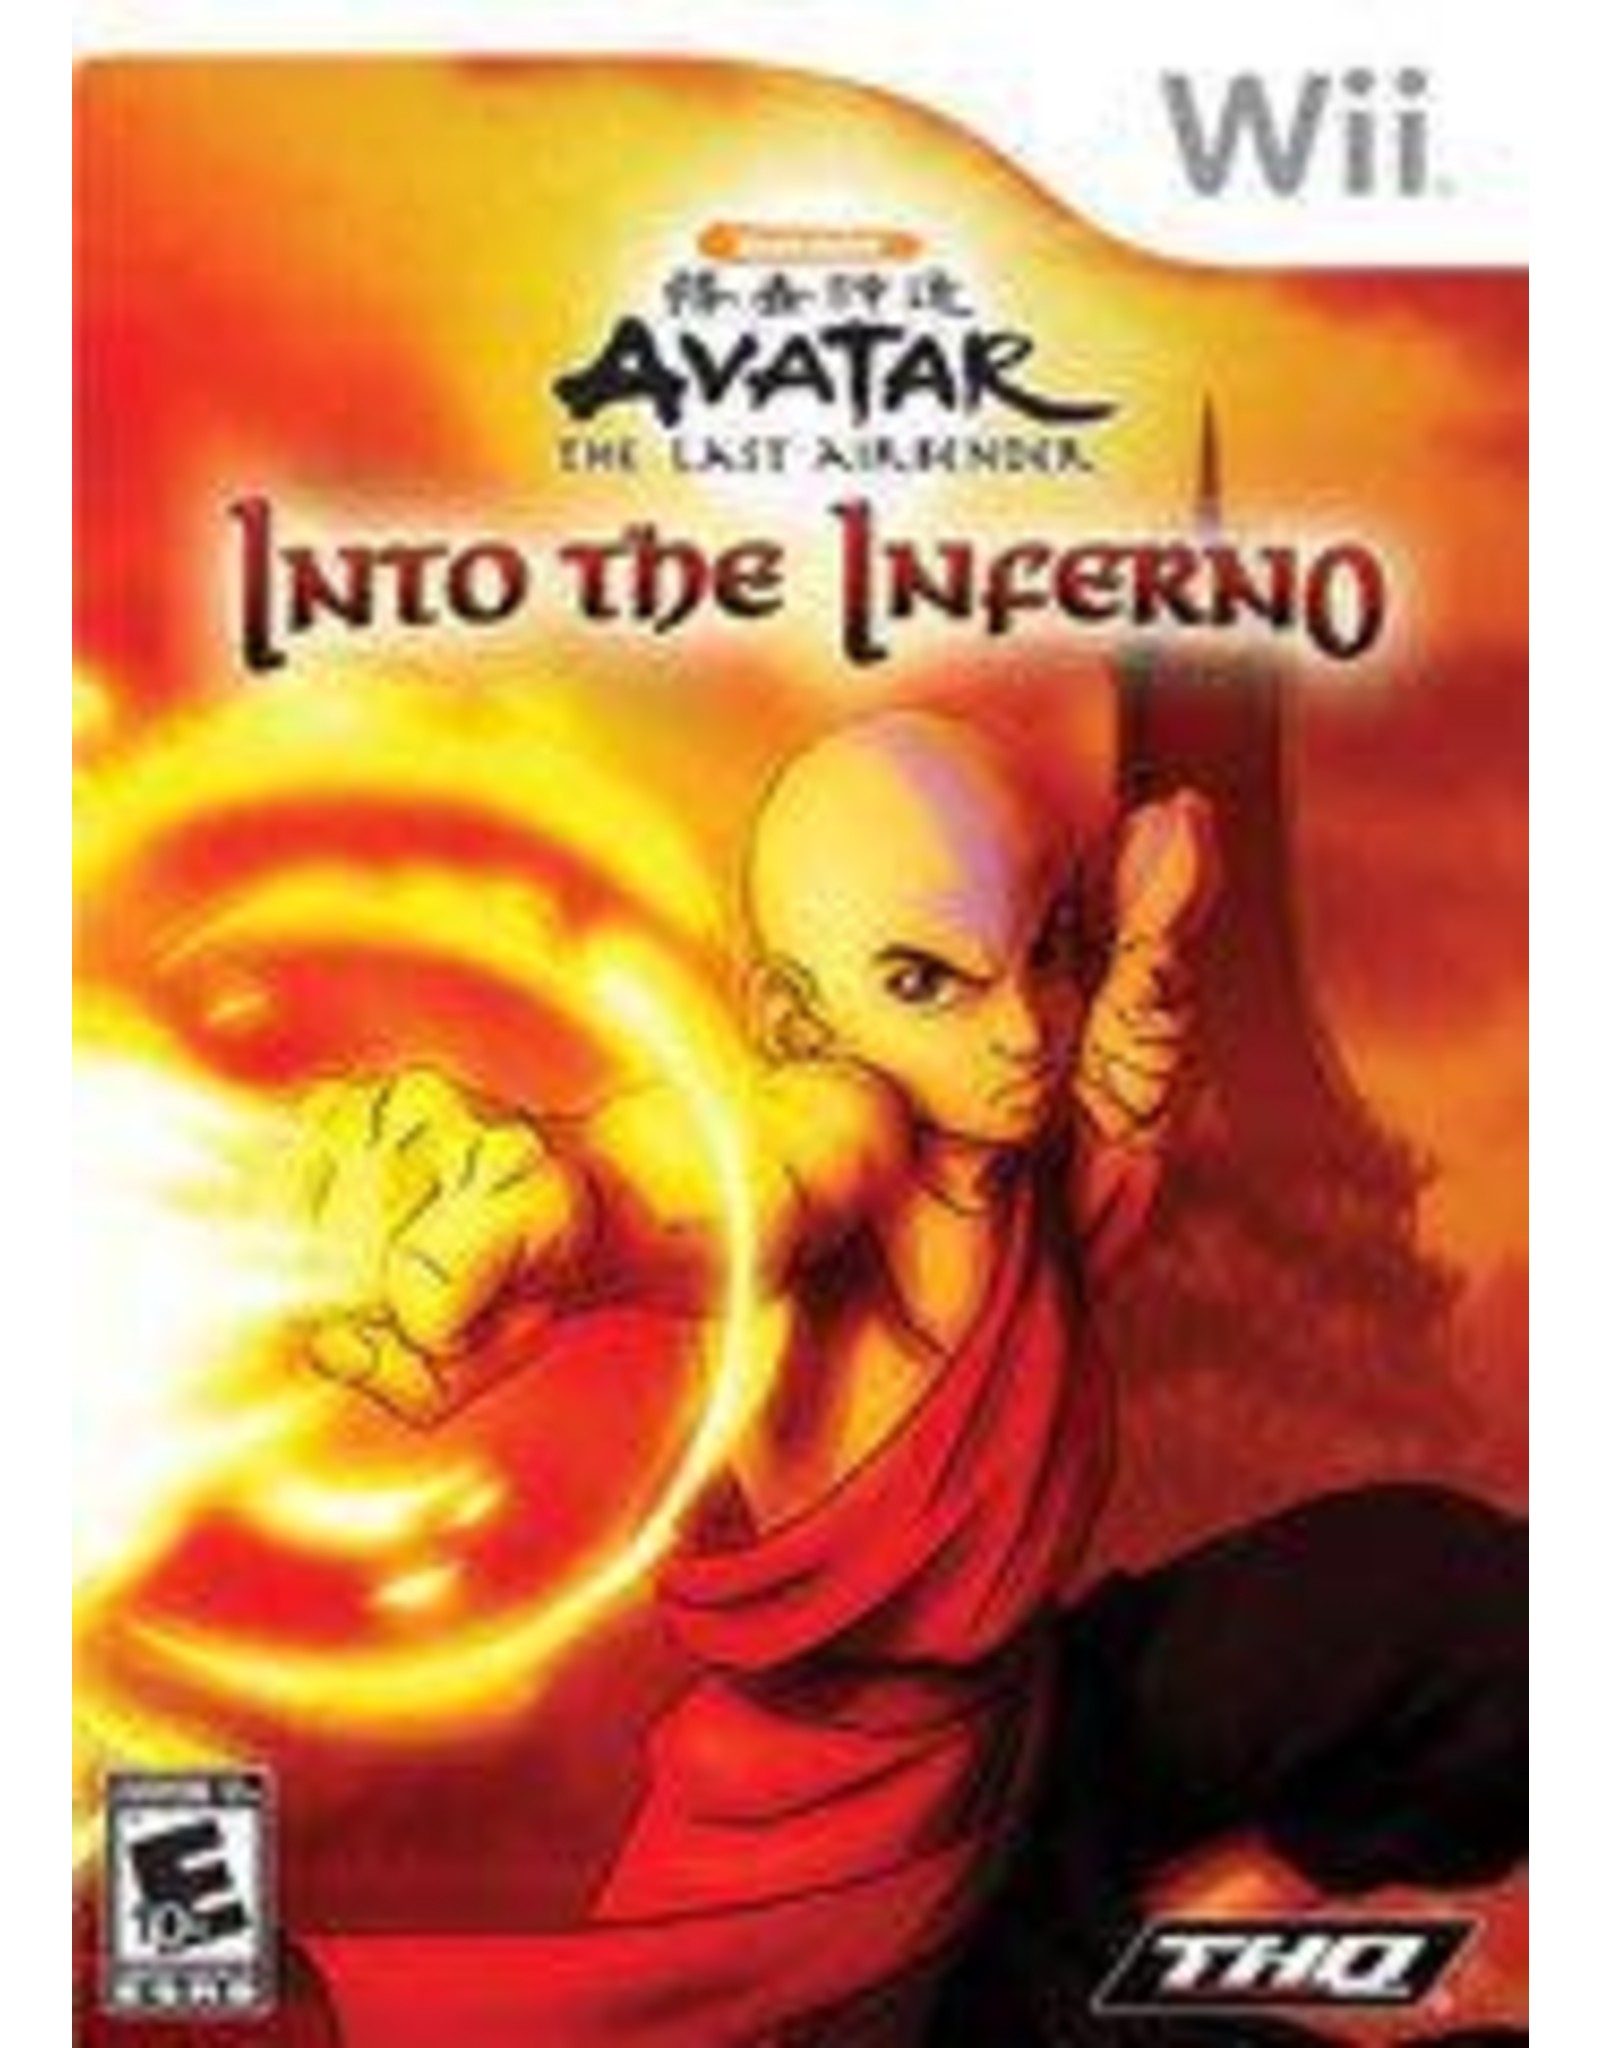 Wii Avatar The Last Airbender Into the Inferno (New!, Sealed)